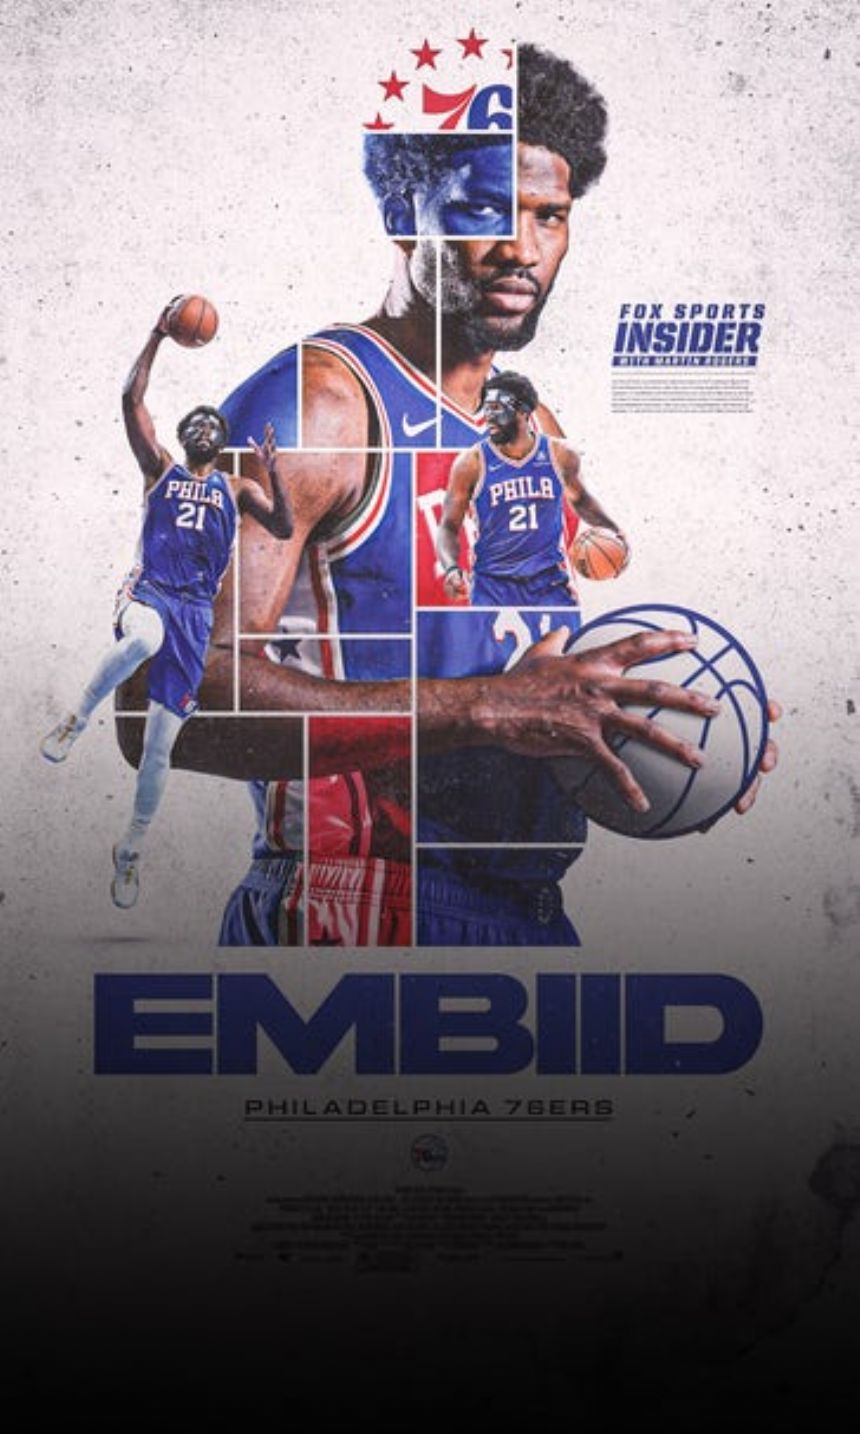 Joel Embiid's burning desire to be great